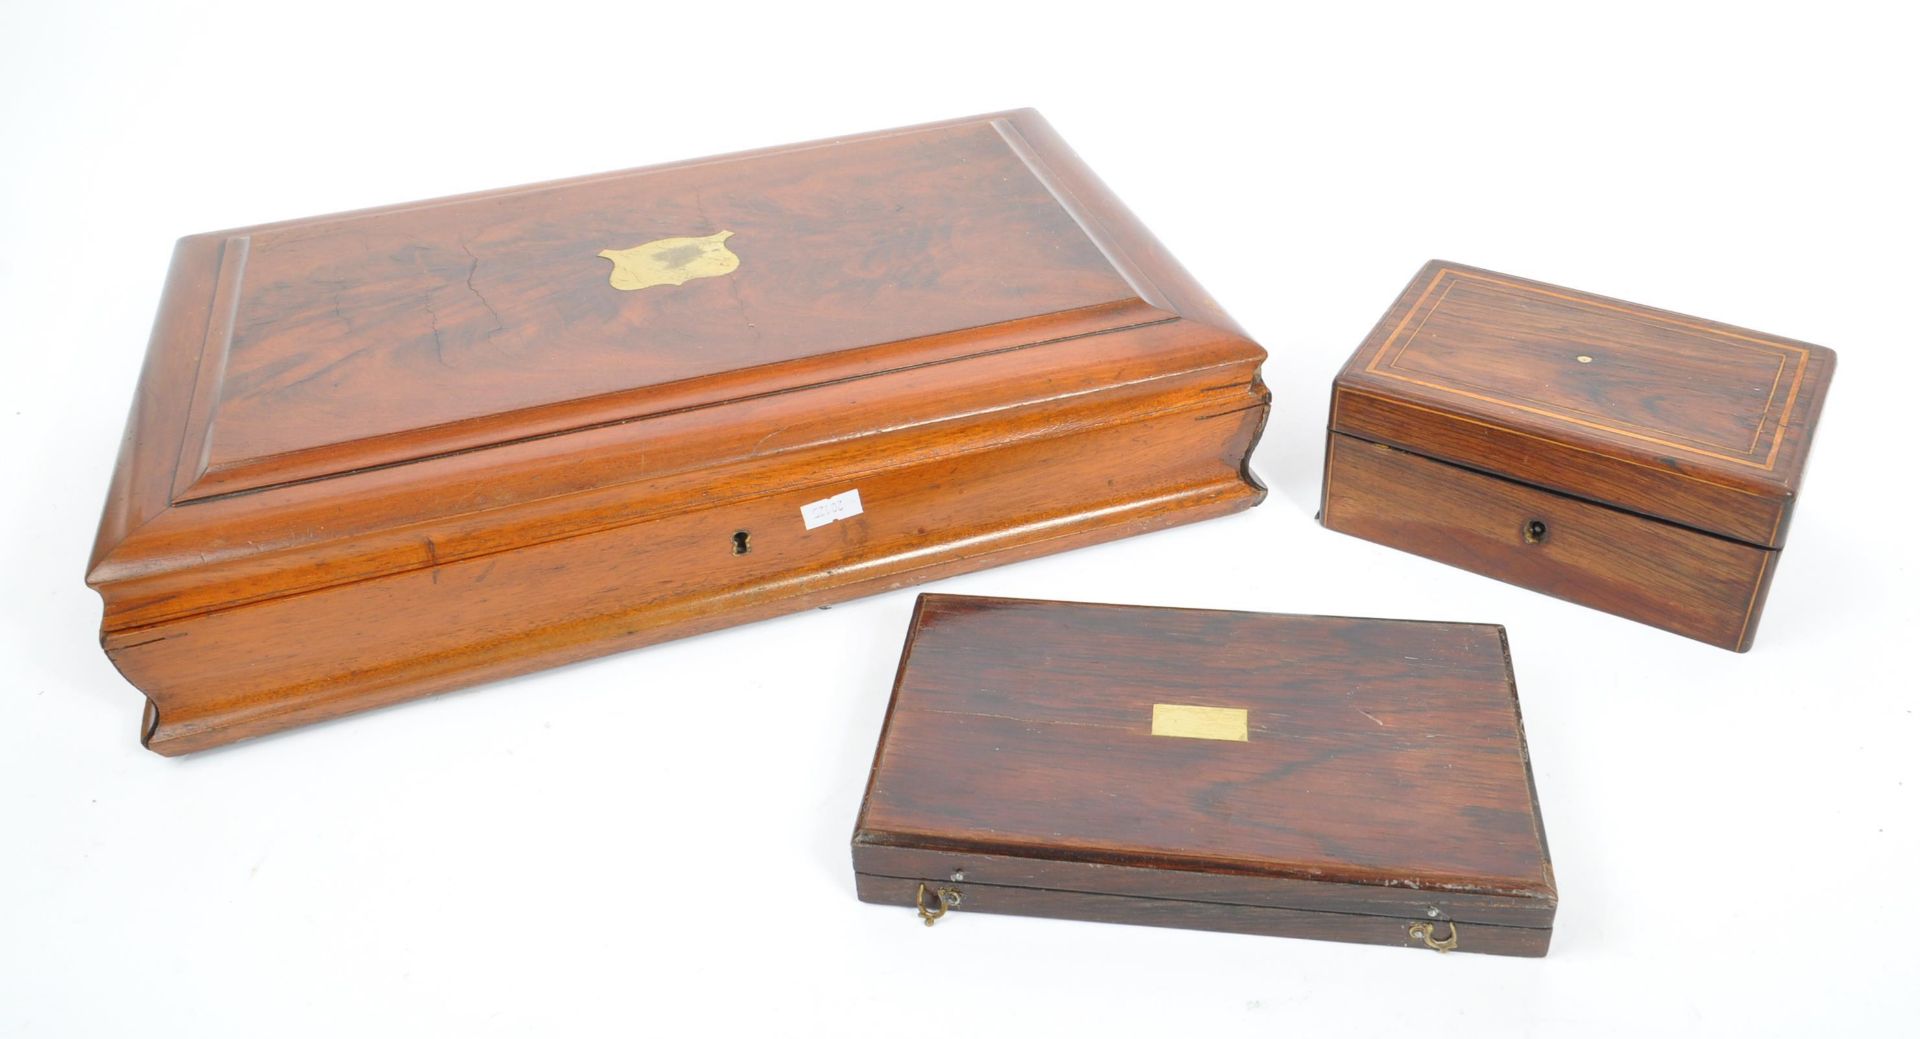 COLLECTION OF THREE WOODEN TRINKET BOXES